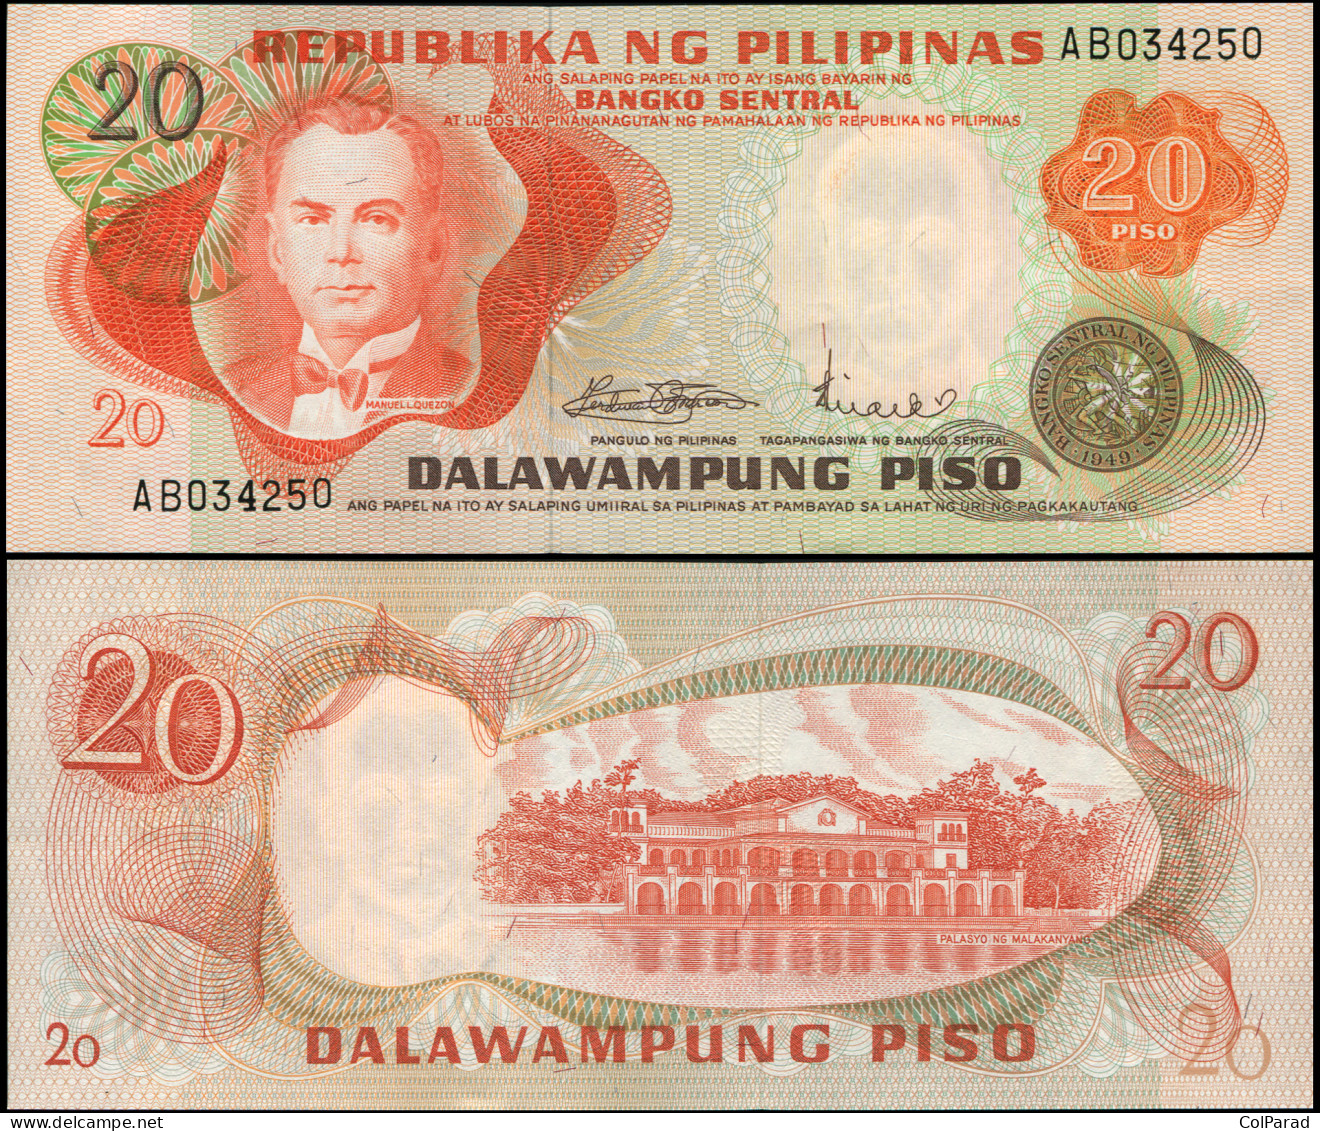 PHILIPPINES 20 PISO - ND (1970) - Paper Unc - P.150a Banknote - Philippines